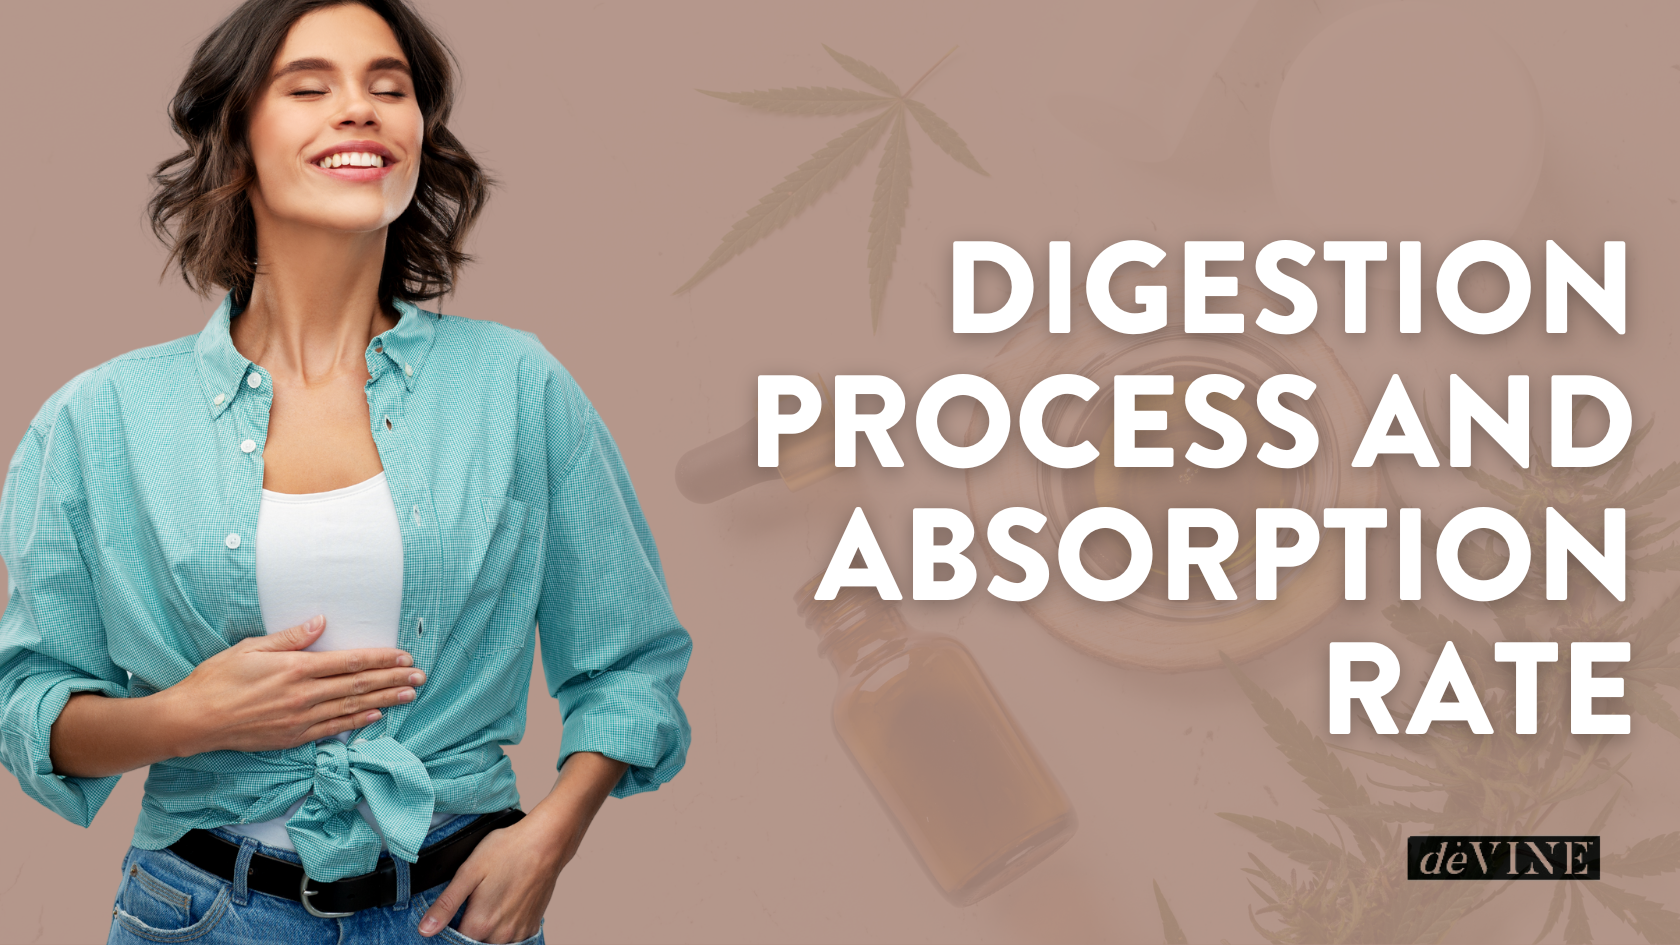 Digestion process and absorption rate